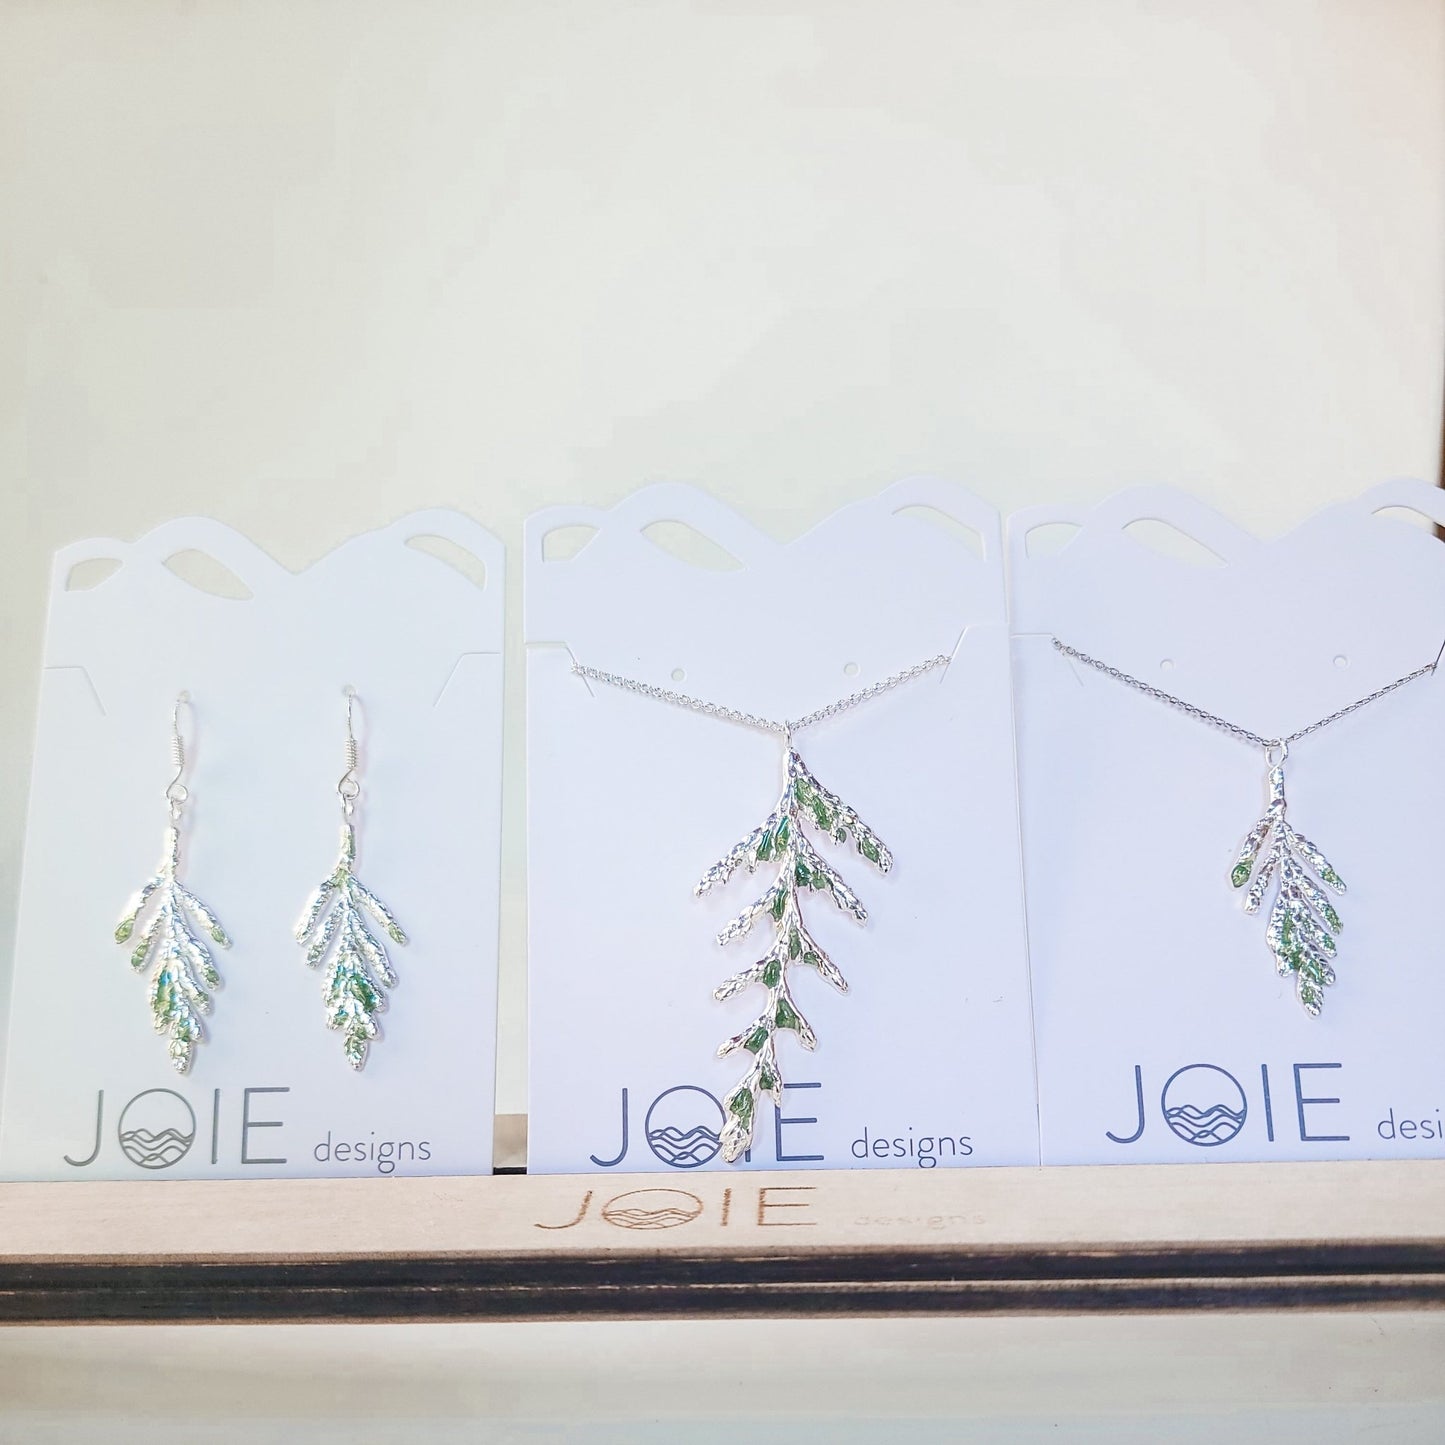 Embellished Silver Thuja and Petite Arborvitae Cedar Leaf Necklaces and matching earrings all  with green resin detailing